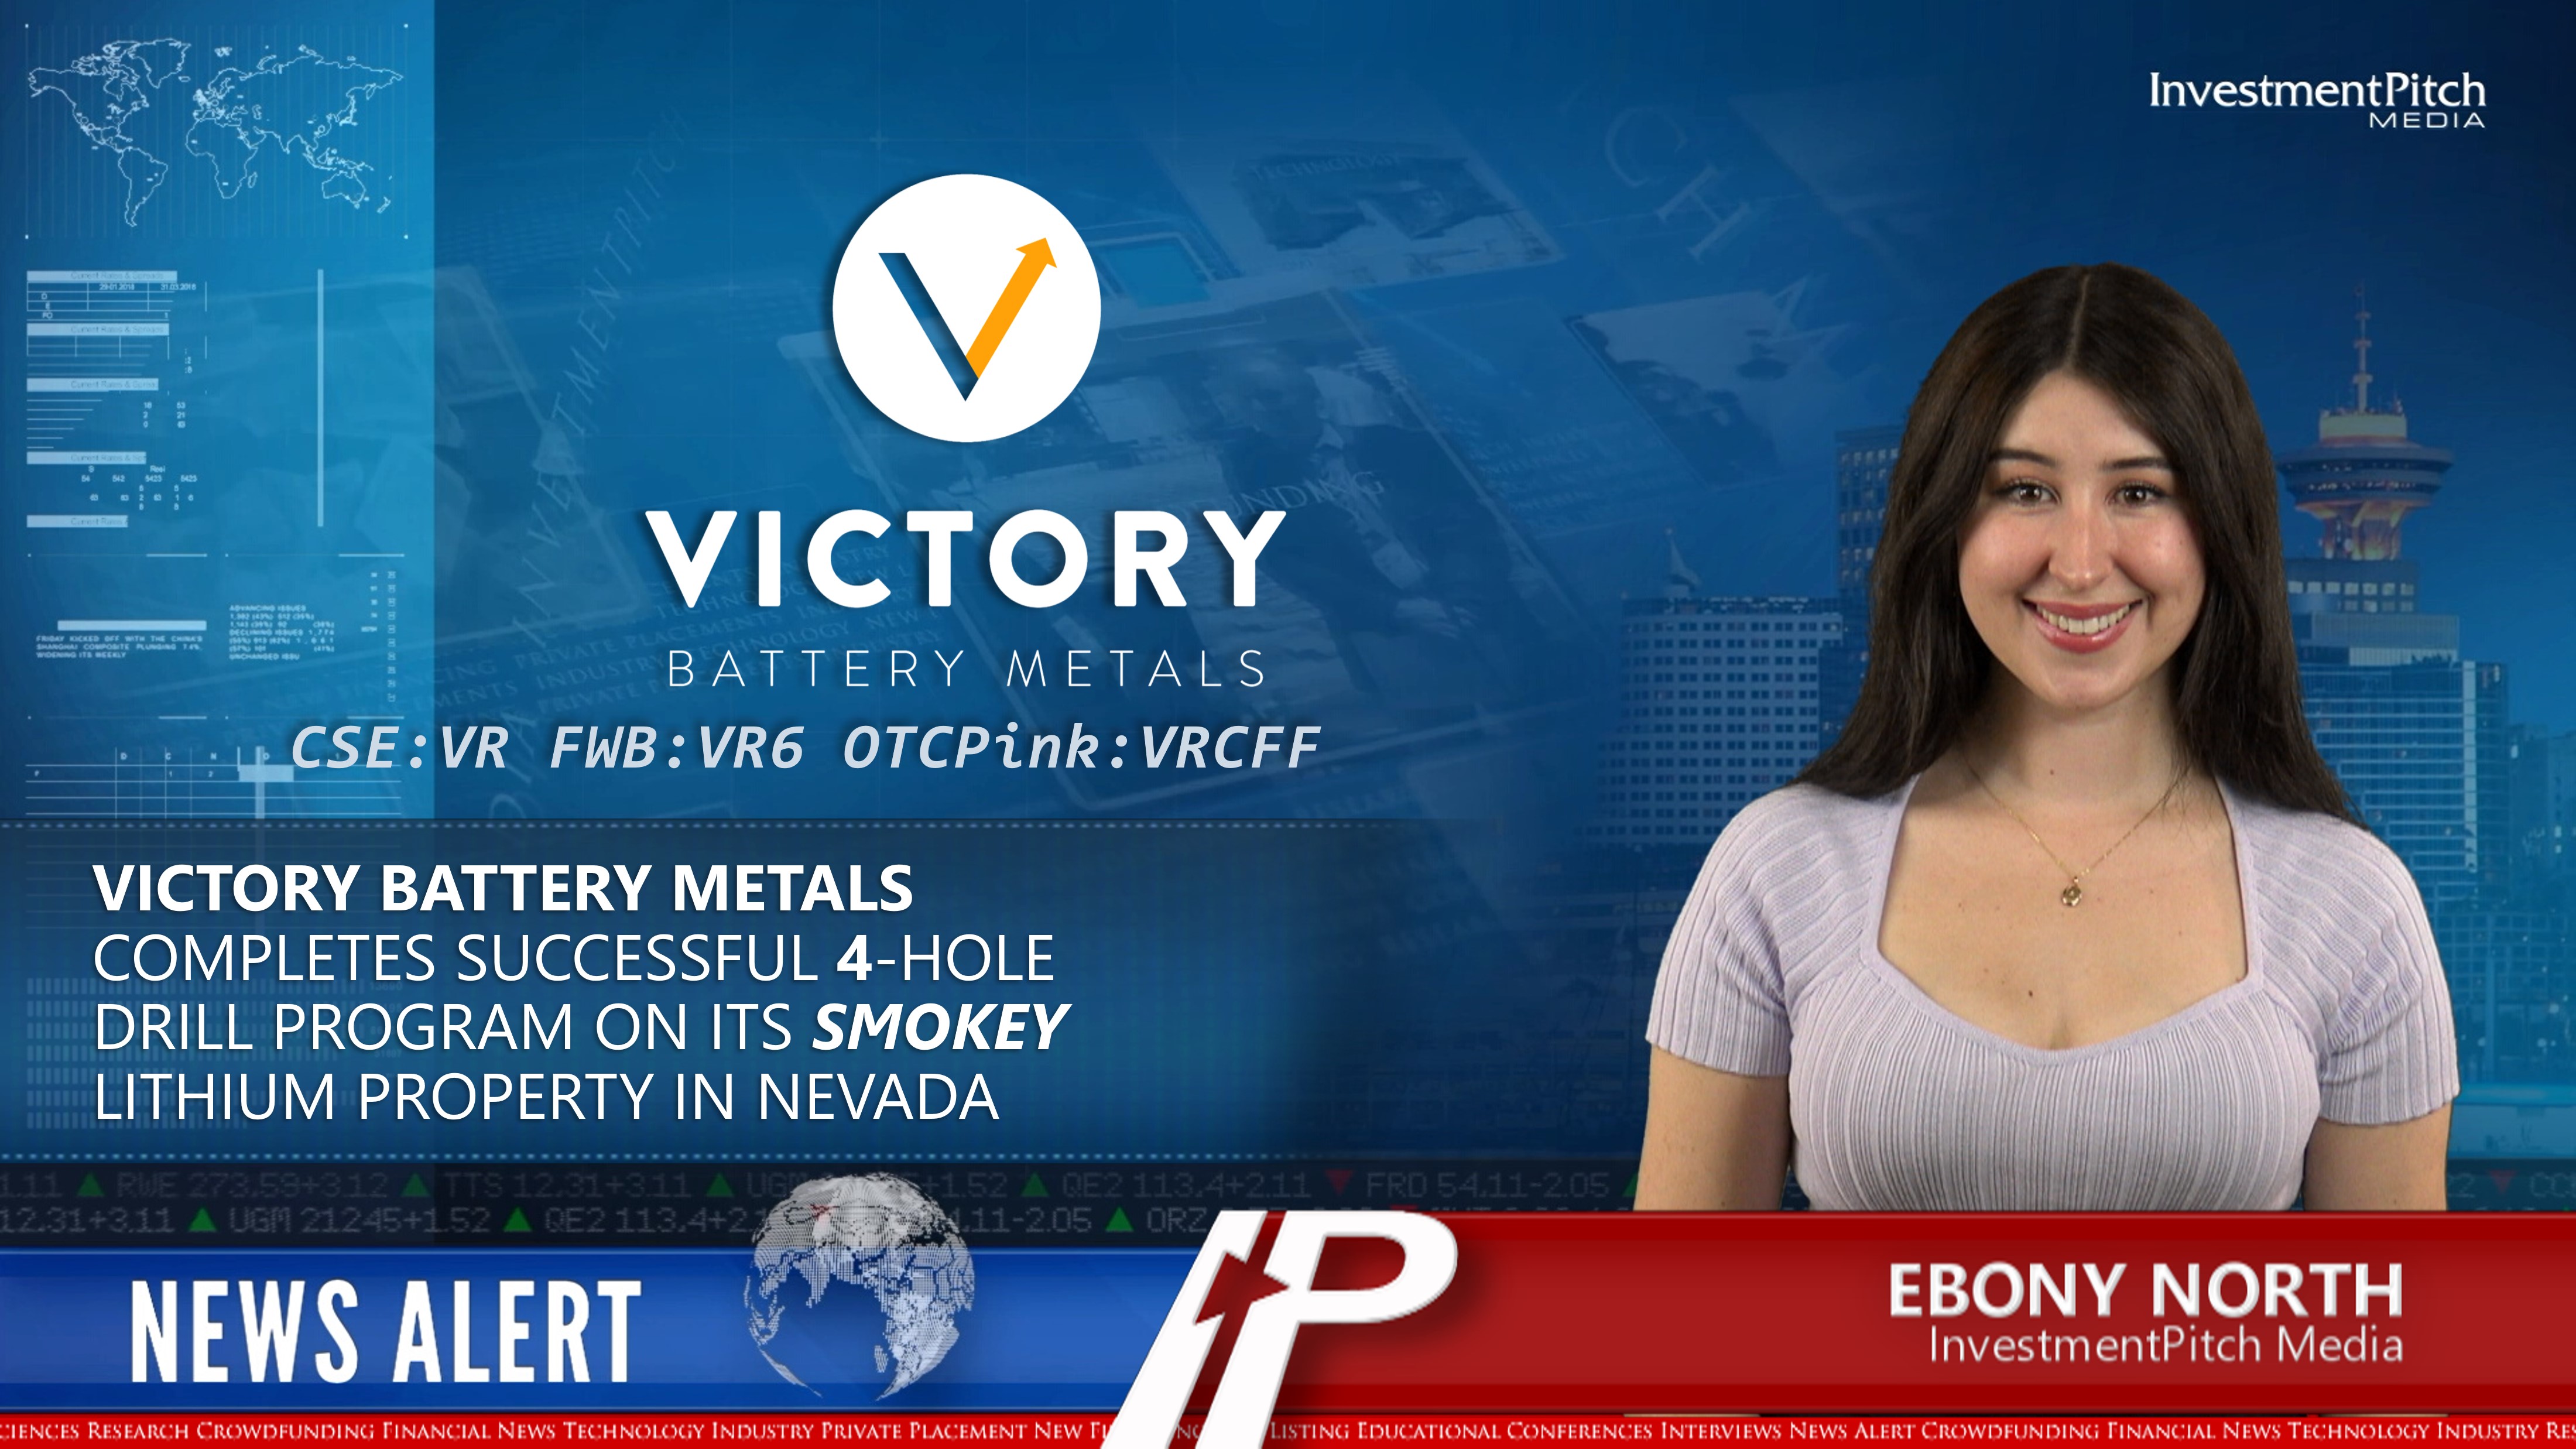 Victory Battery Metals completes successful 4-hole drill program on its Smokey lithium property in Nevada: Victory Battery Metals completes successful 4-hole drill program on its Smokey lithium property in Nevada